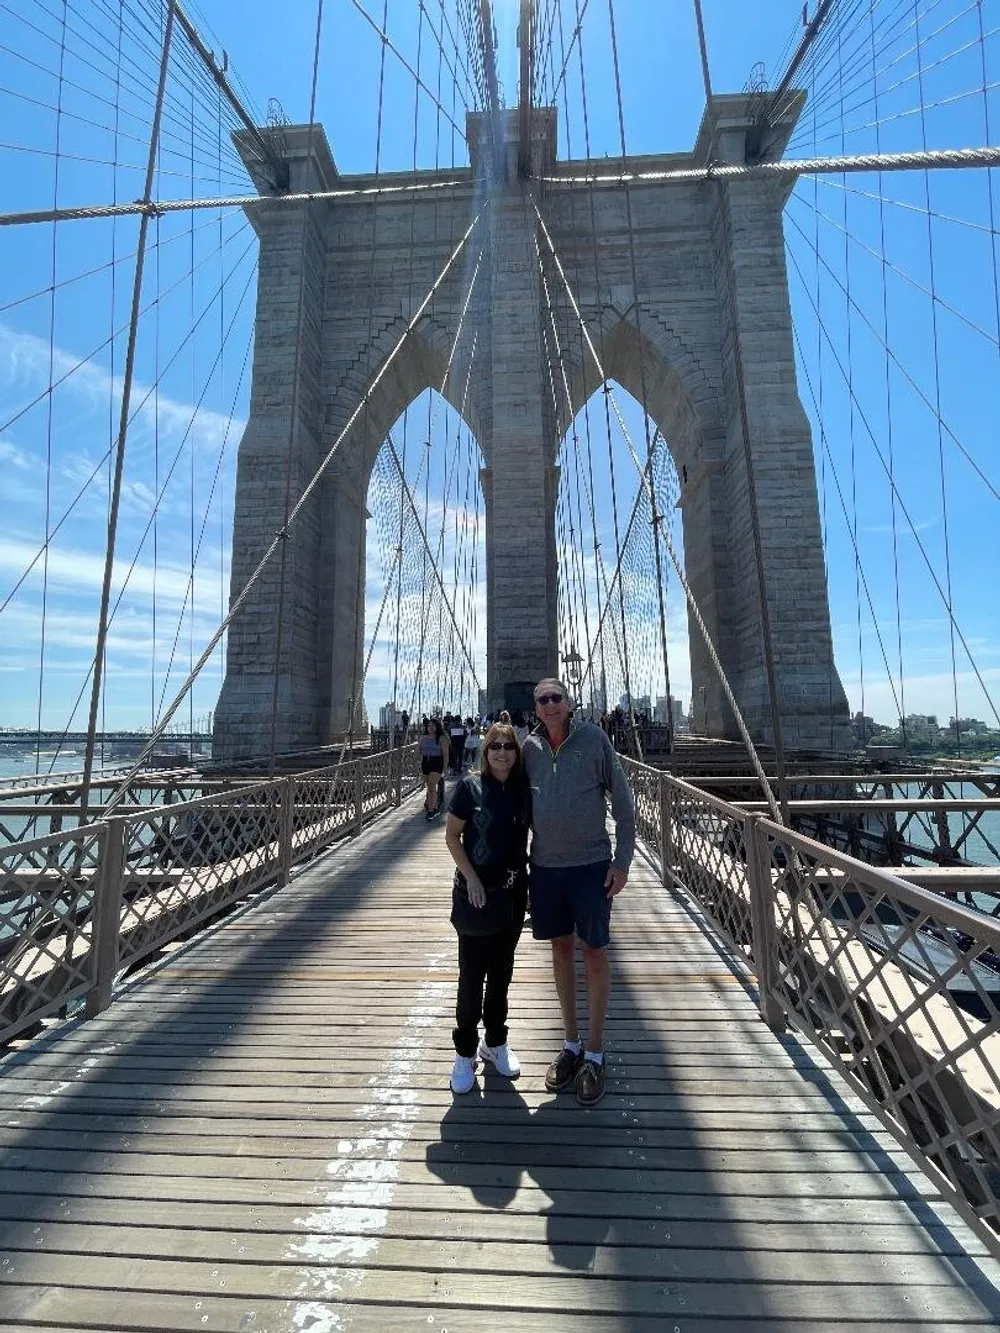 Two people are smiling for a photo on the walkway of a grand suspension bridge with intricate cables and stone towers under a clear blue sky